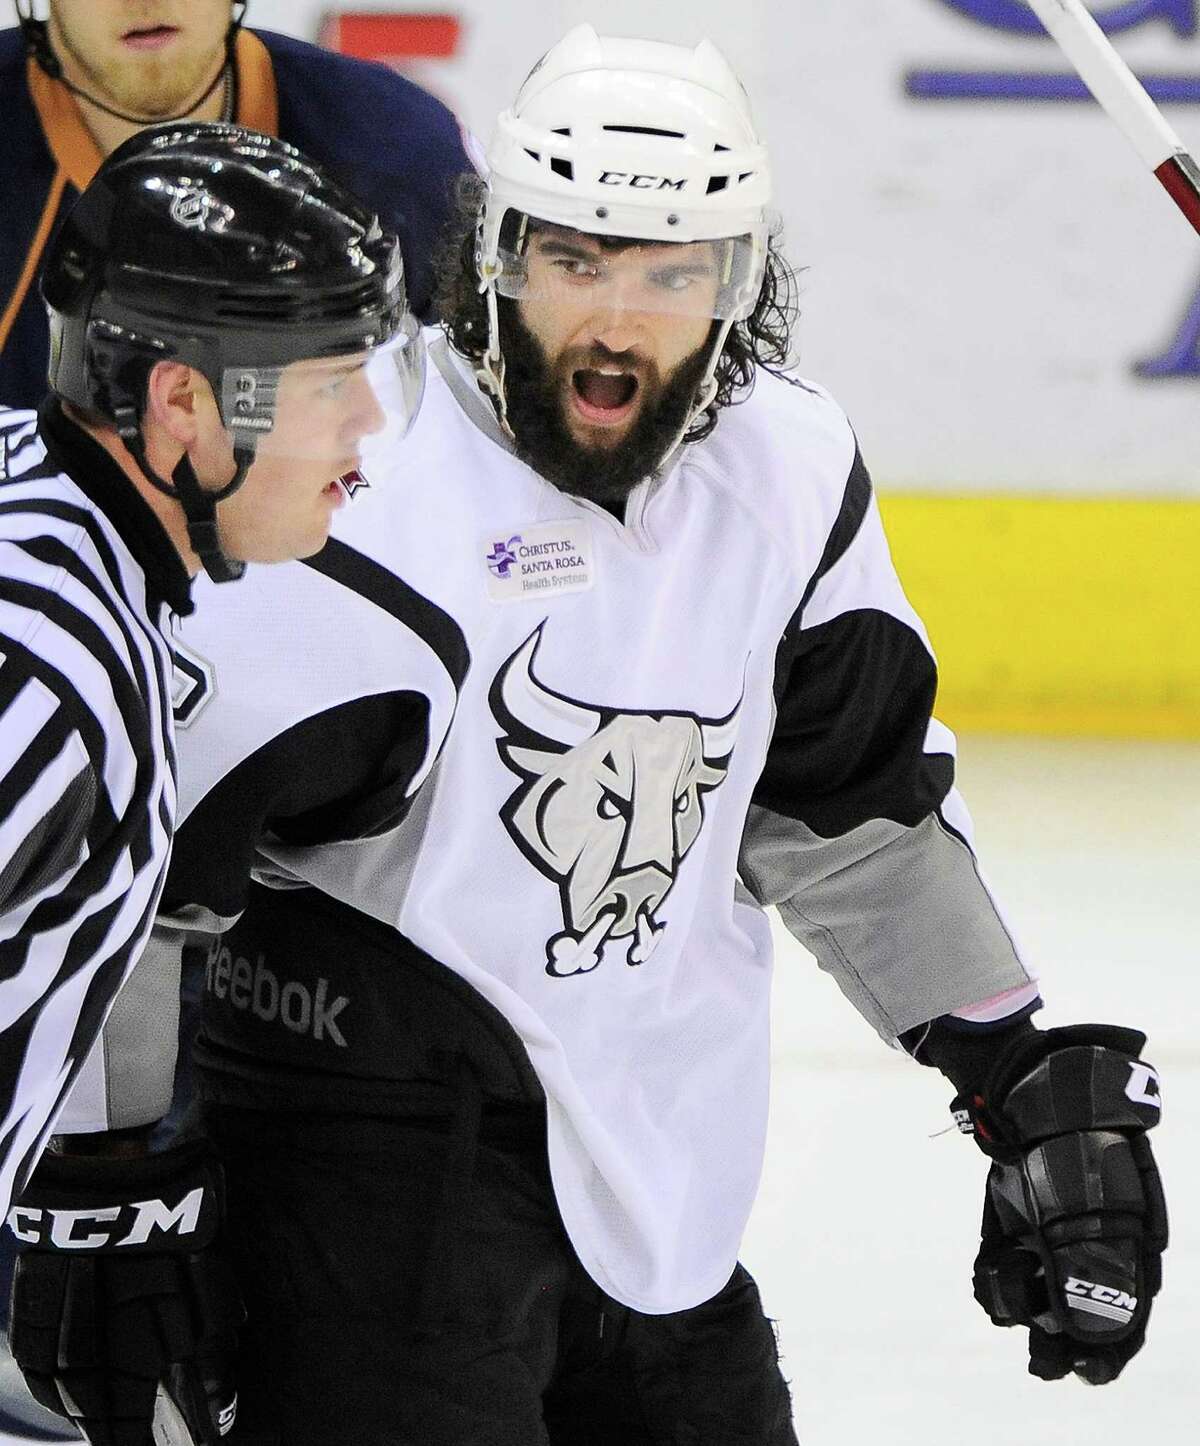 San Antonio Rampage's Scott TImmins, right, argues a call with an official during the third period of an AHL hockey game against the Oklahoma City Barons, Thursday, May 10, 2012, in San Antonio.